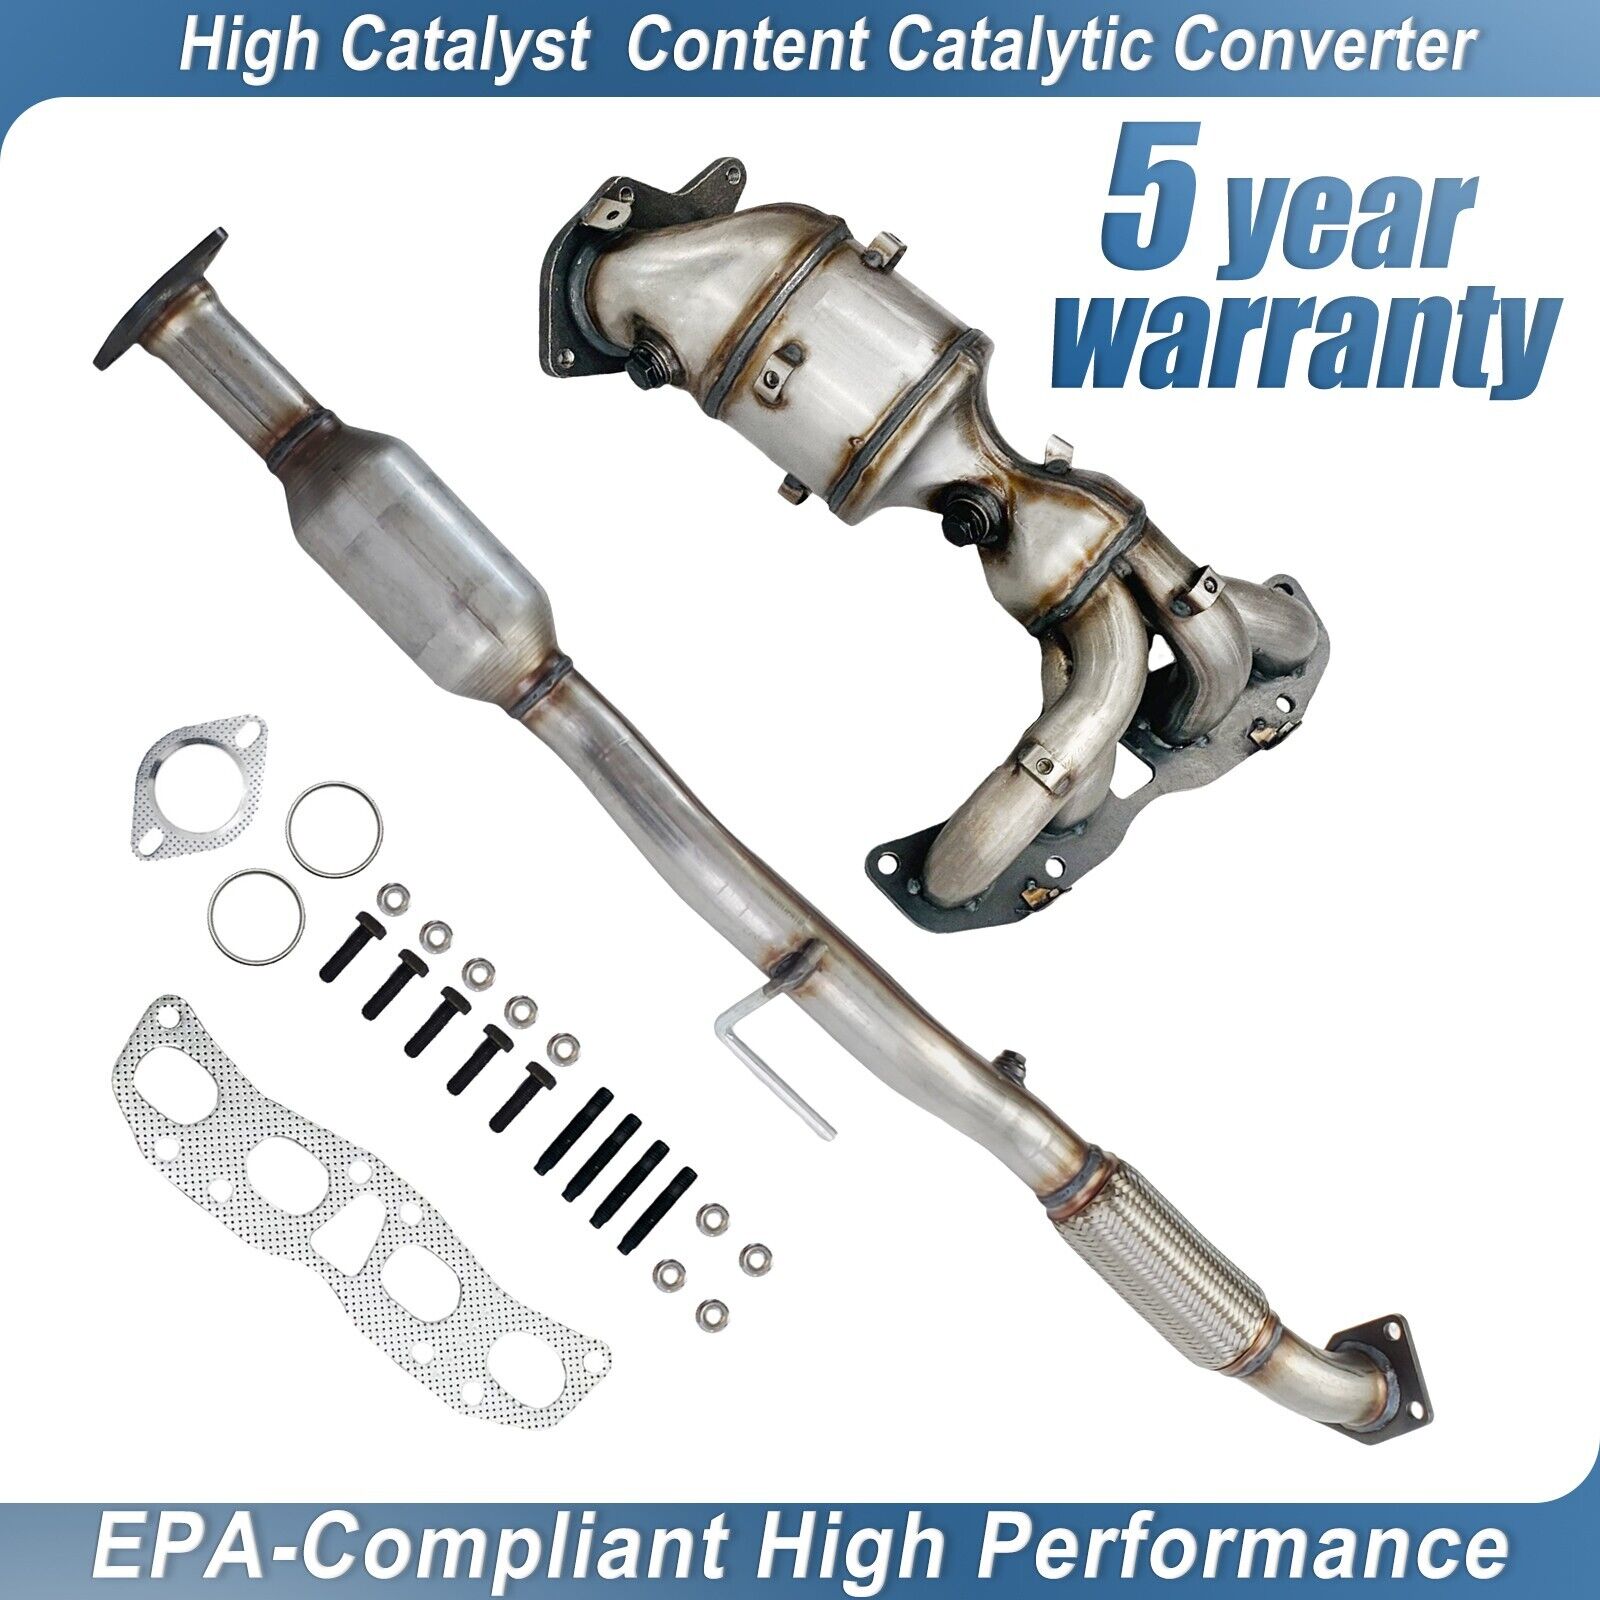 Front + Rear Catalytic Converter for 2007 - 2012 Nissan Altima L4 2.5L EPA